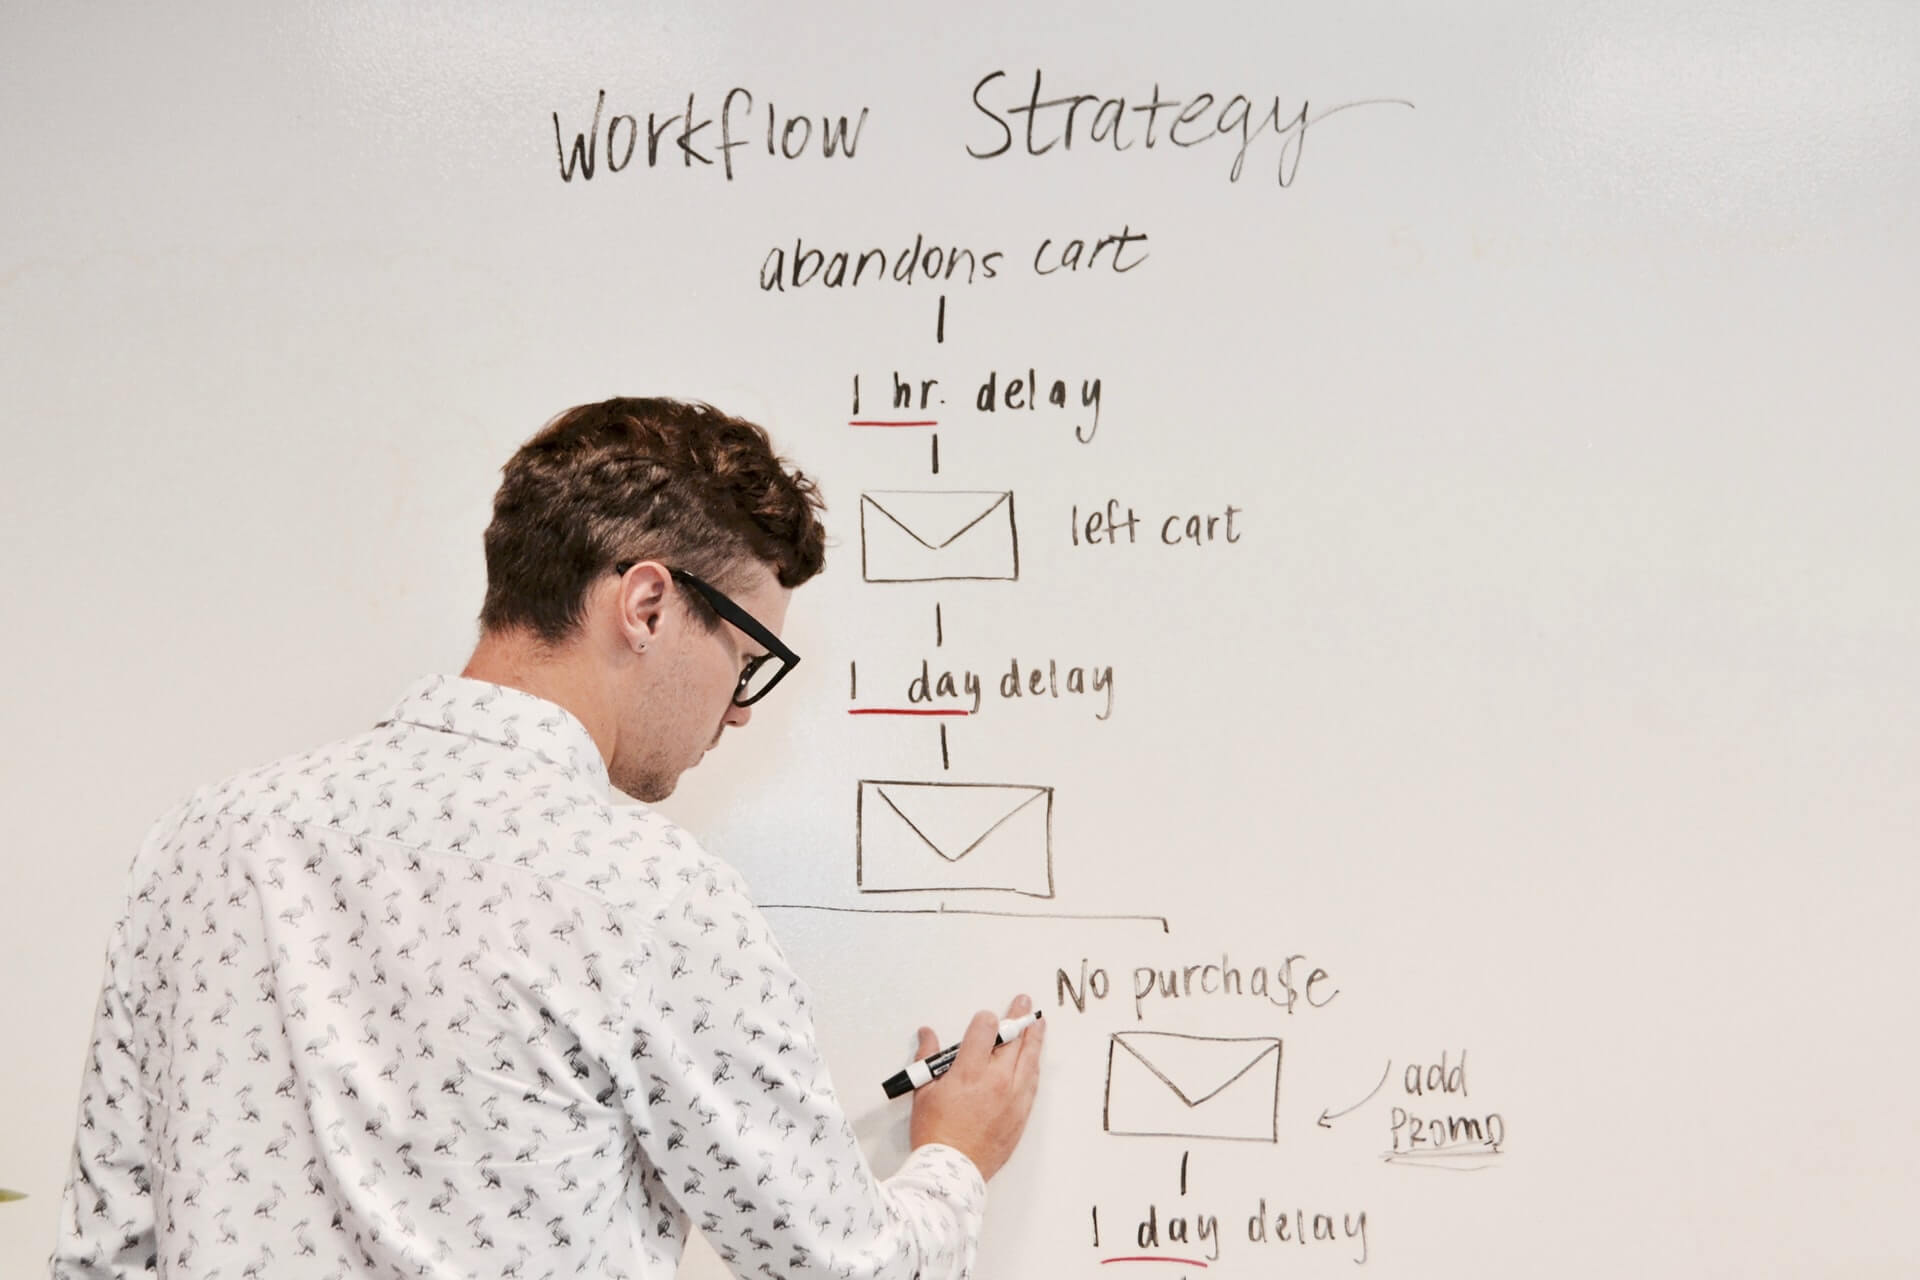 Person writing a workflow strategy on a whiteboard